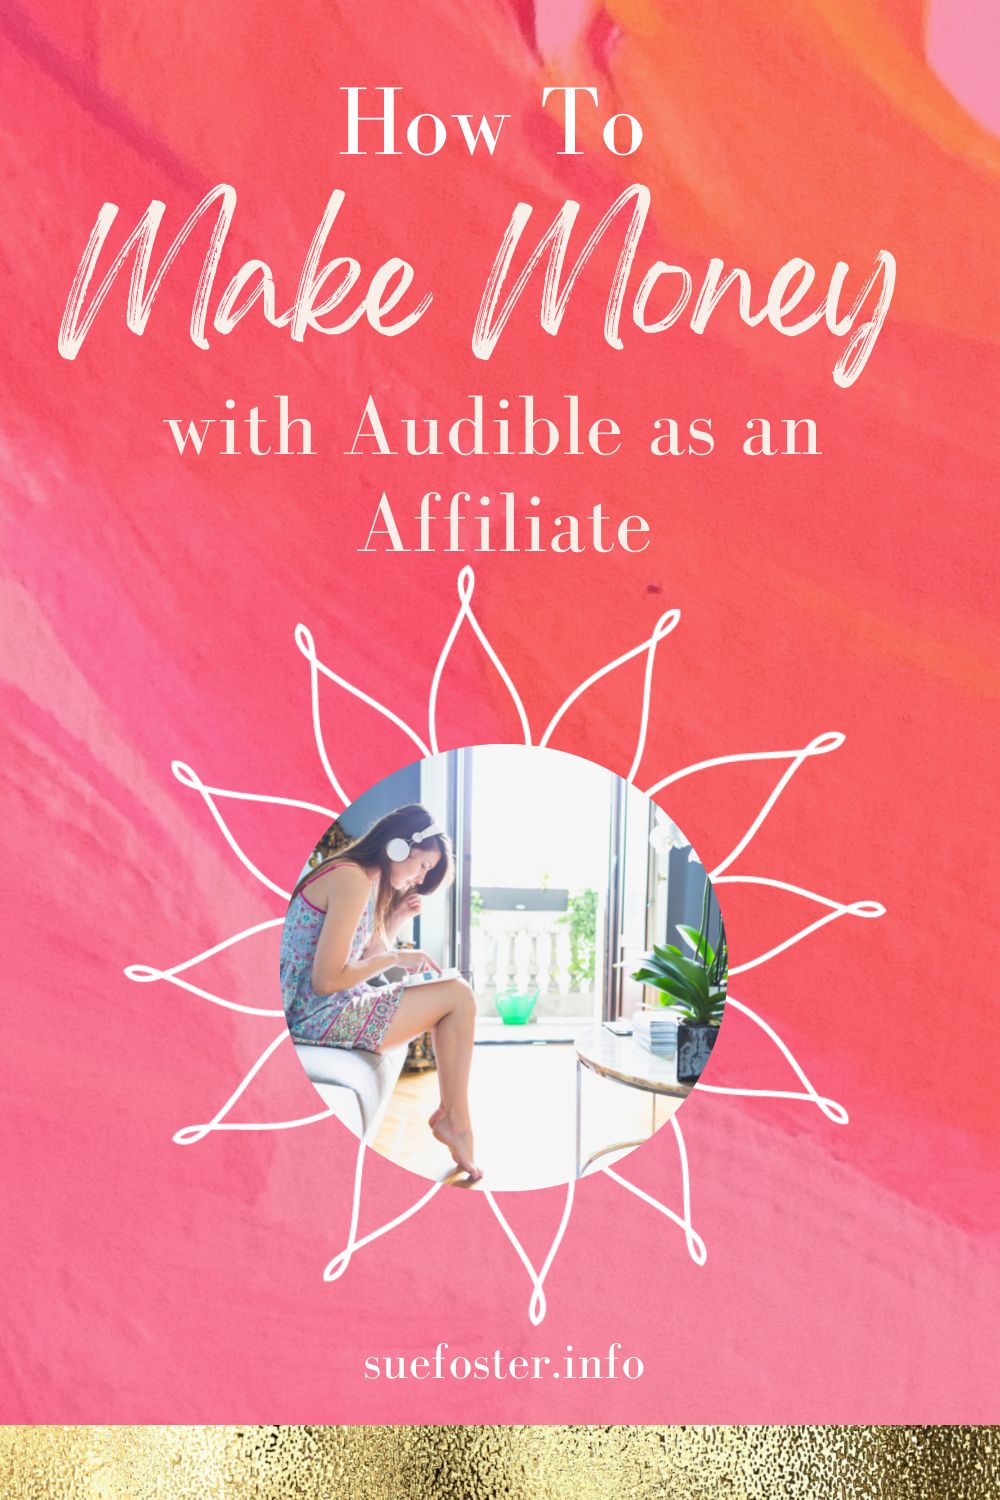 Audible is a service that sells and produces audiobooks and is part of Amazon. Customers have access to the world's largest selection of audiobooks, podcasts and exclusive originals. This post will cover how to make money with Audible as an affiliate.